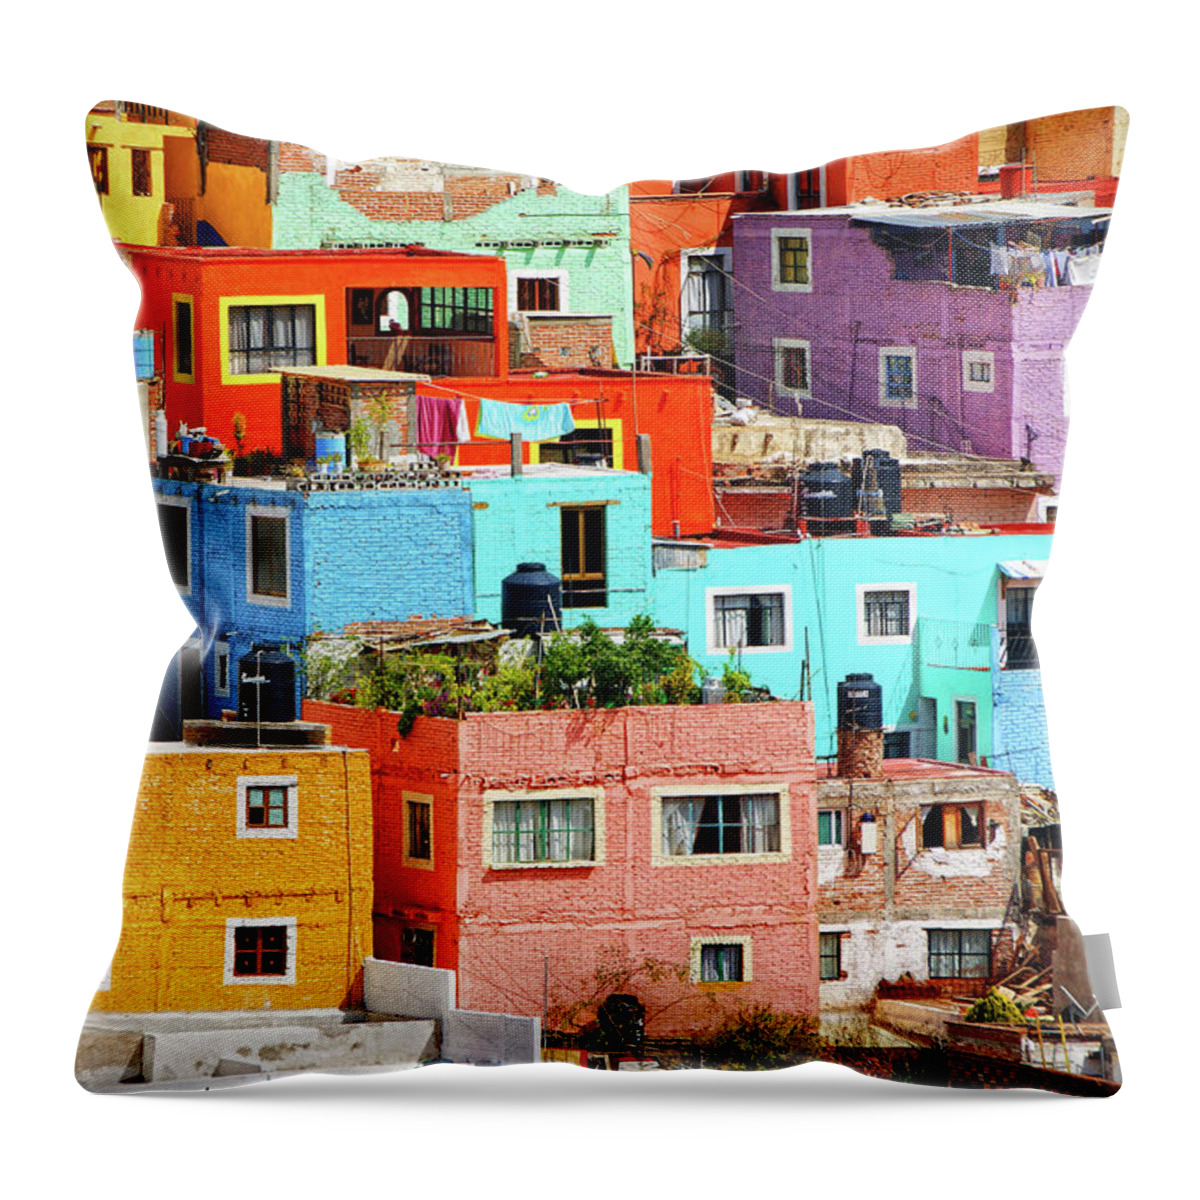 Stone Wall Throw Pillow featuring the photograph Cultural Colonial Cities Of Mexico by Www.infinitahighway.com.br